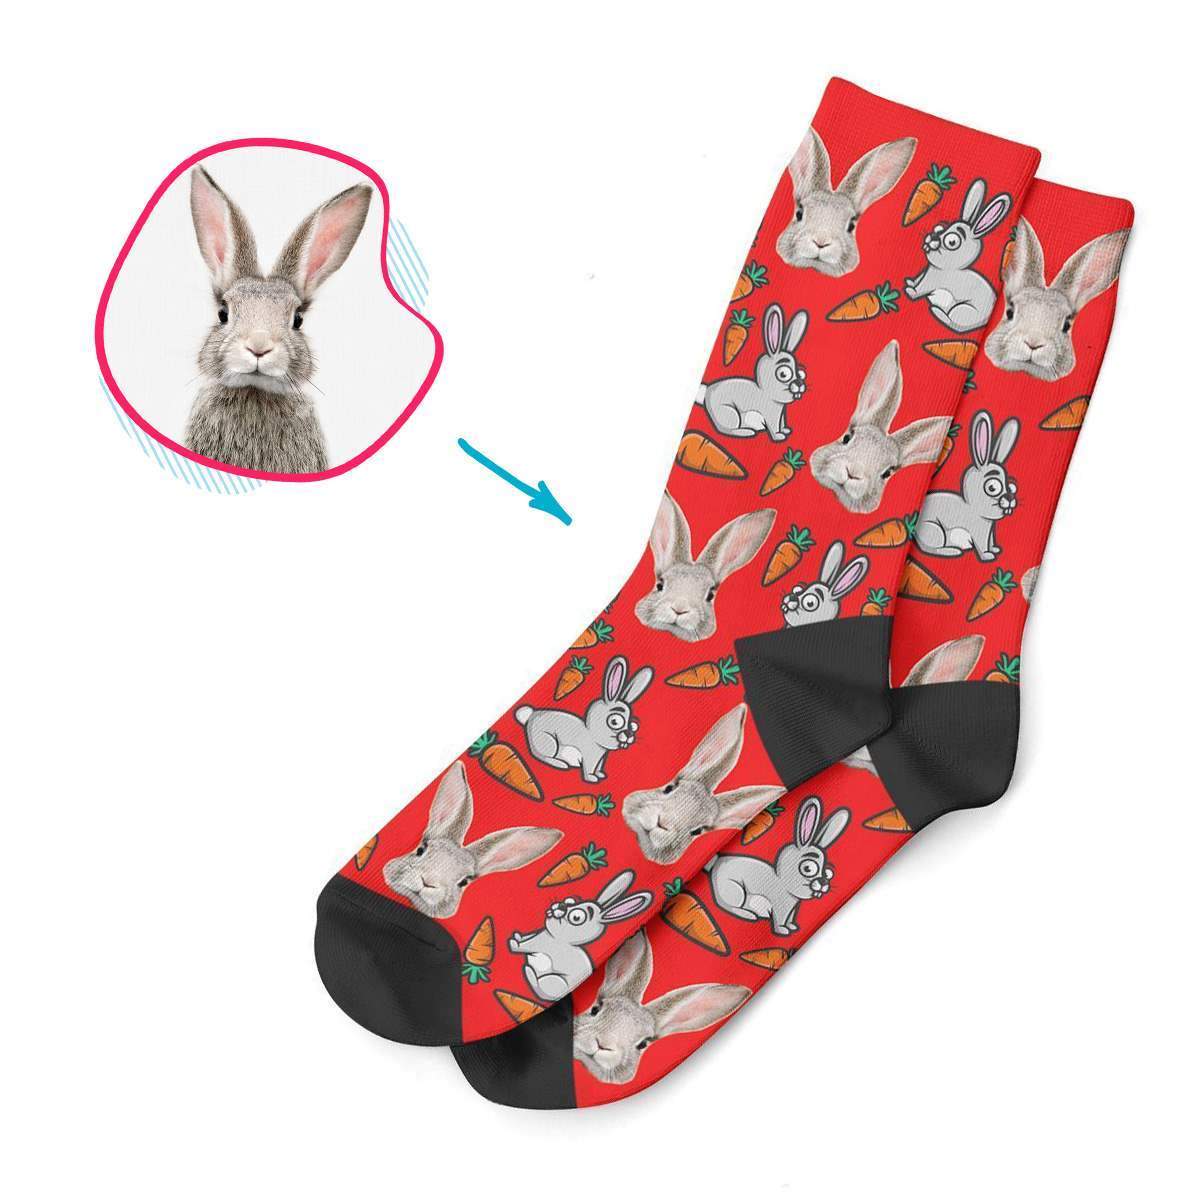 red Bunny socks personalized with photo of face printed on them